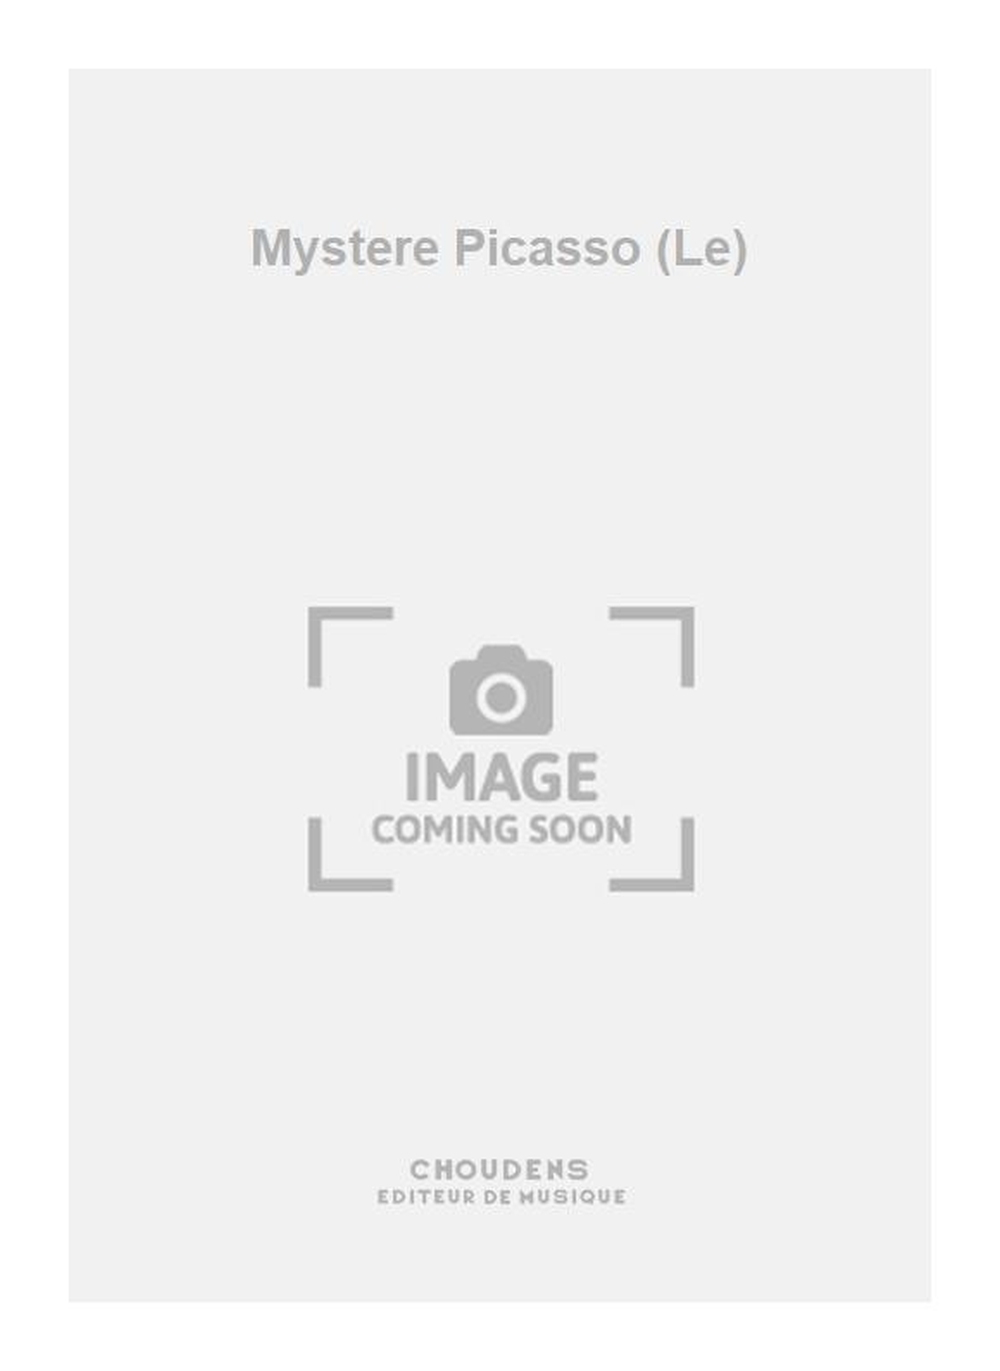 Auric: Mystere Picasso (Le)